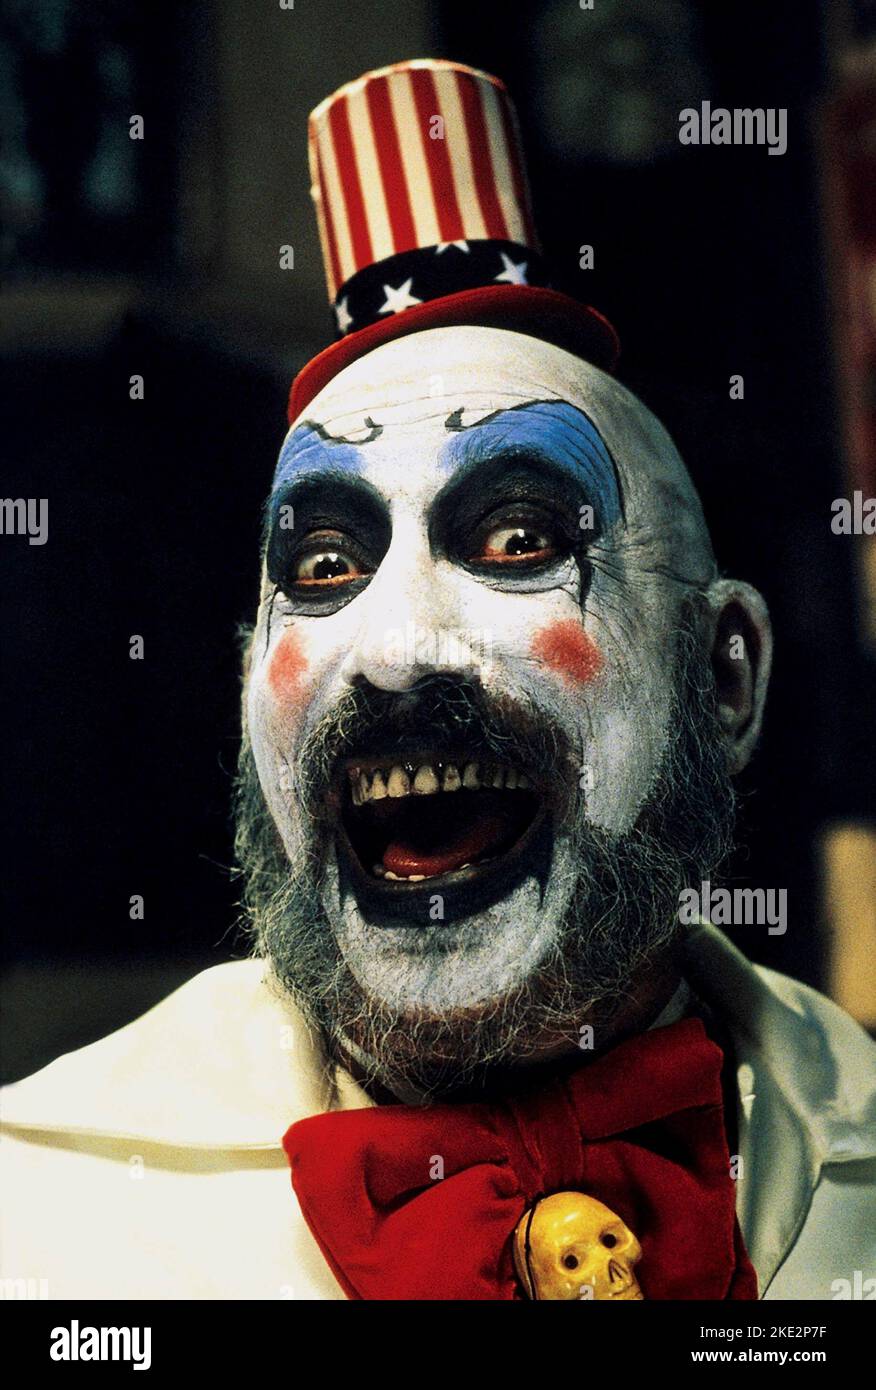 HOUSE OF 1000 CORPSES, SID HAIG, 2003 Stock Photo